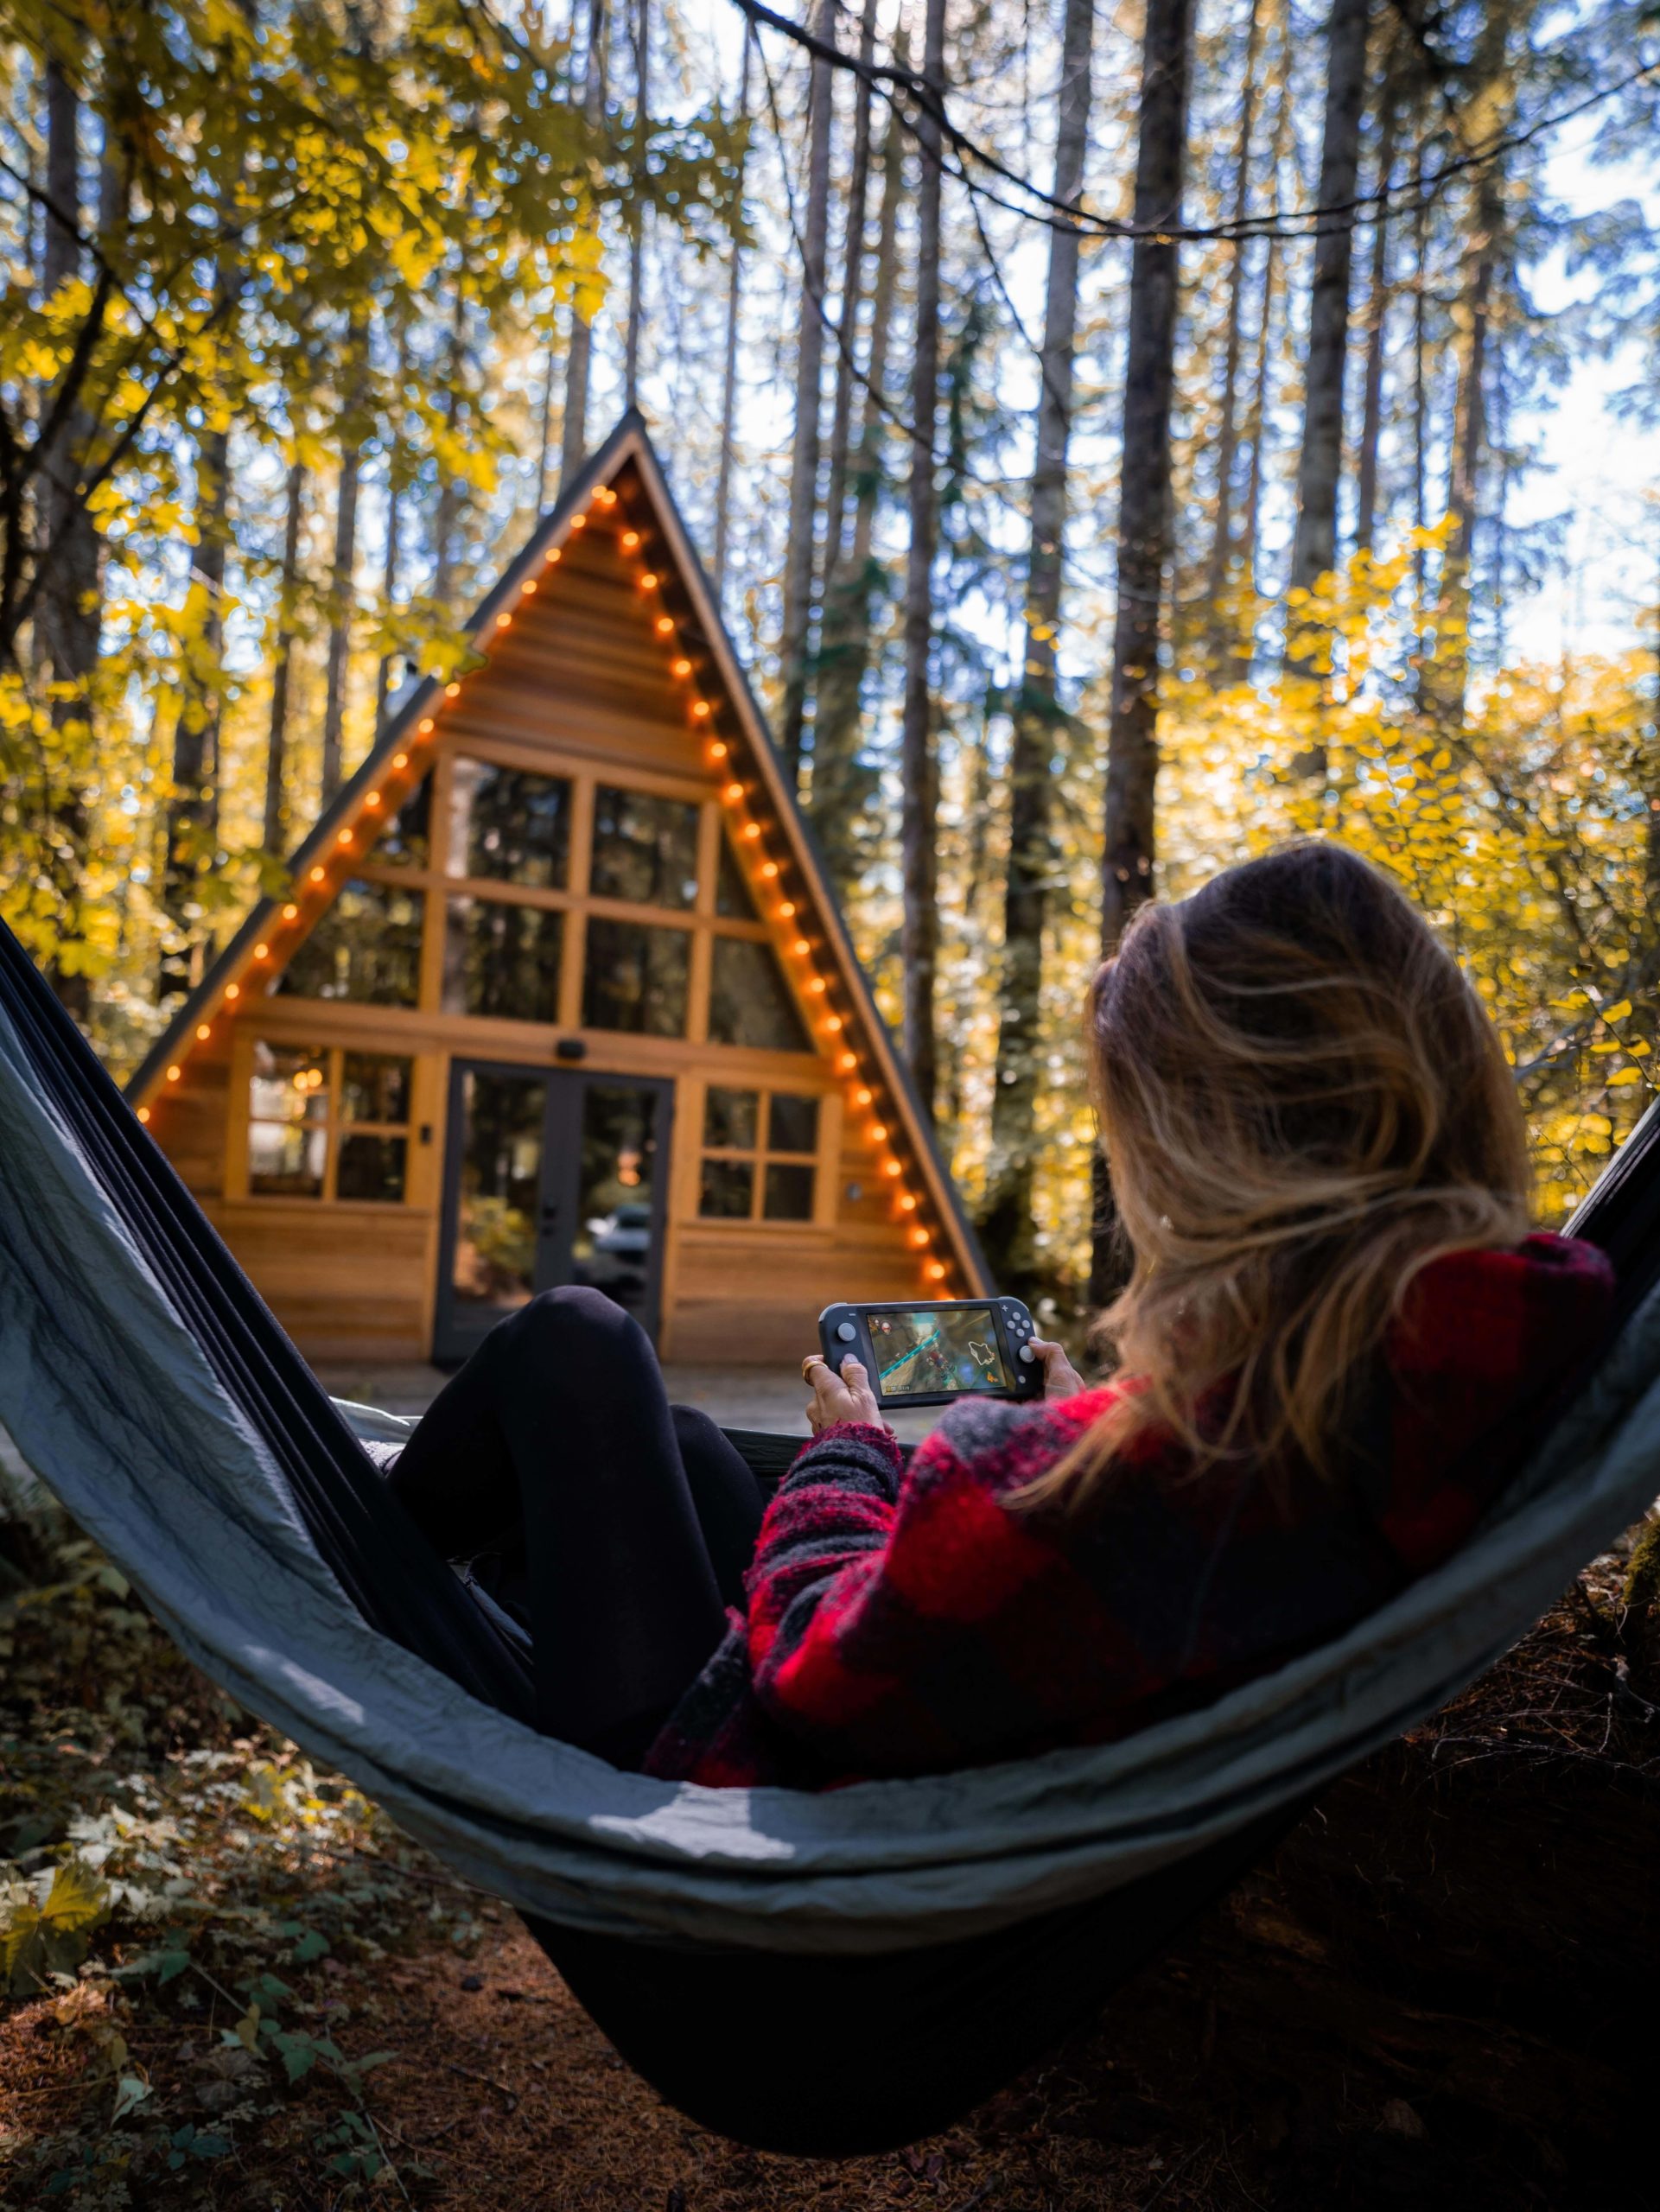 a cosy wooden a-frame cabin in a forest with Jess in a hammock in the foreground